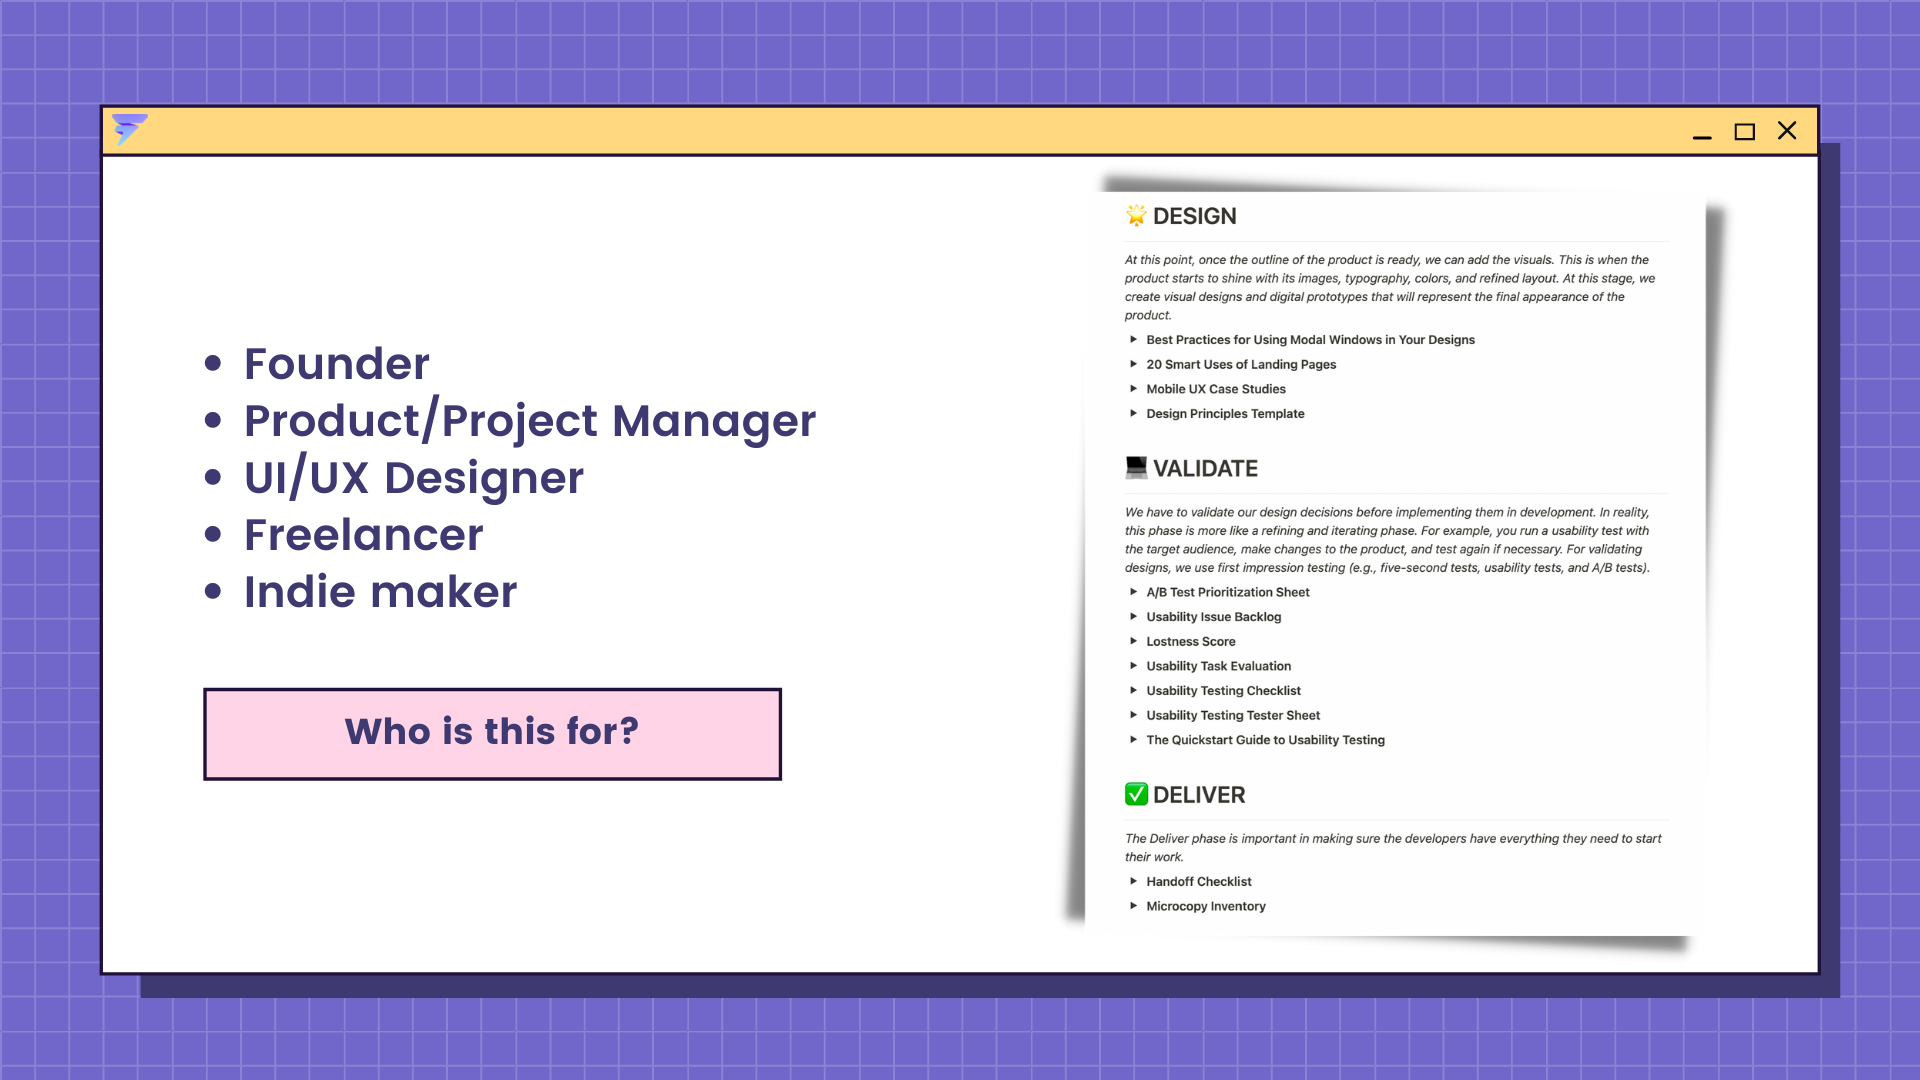 Get feedback from a vast remote working audience about Document Kit for PM and UI/UX Designer